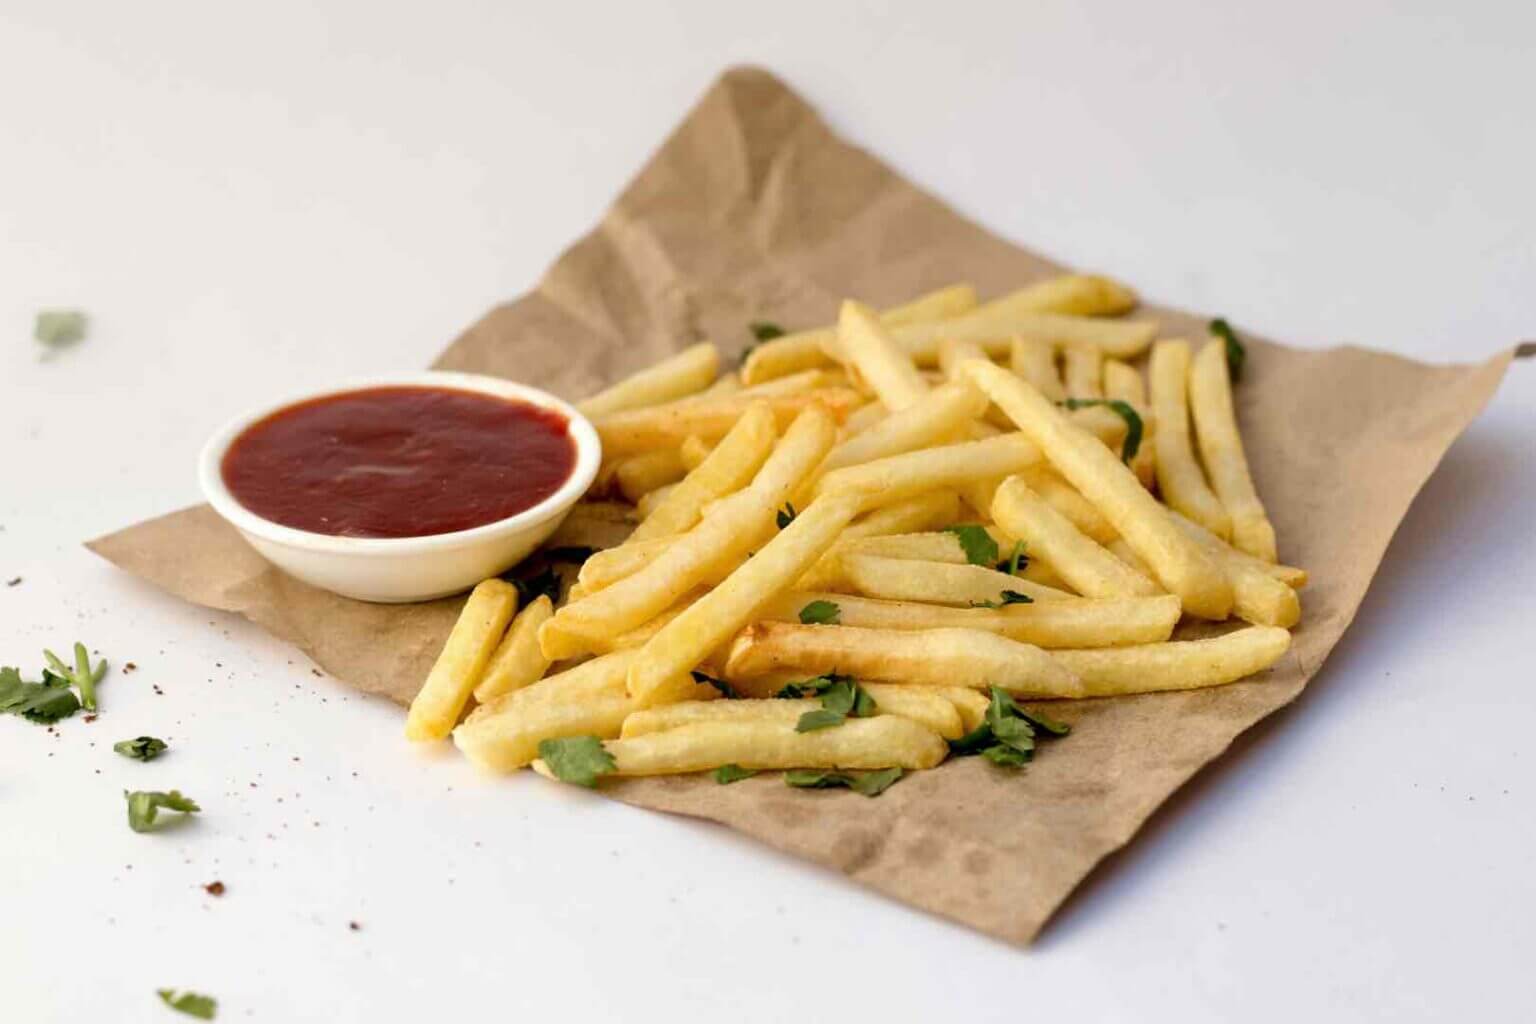 French Fries or Belgian?